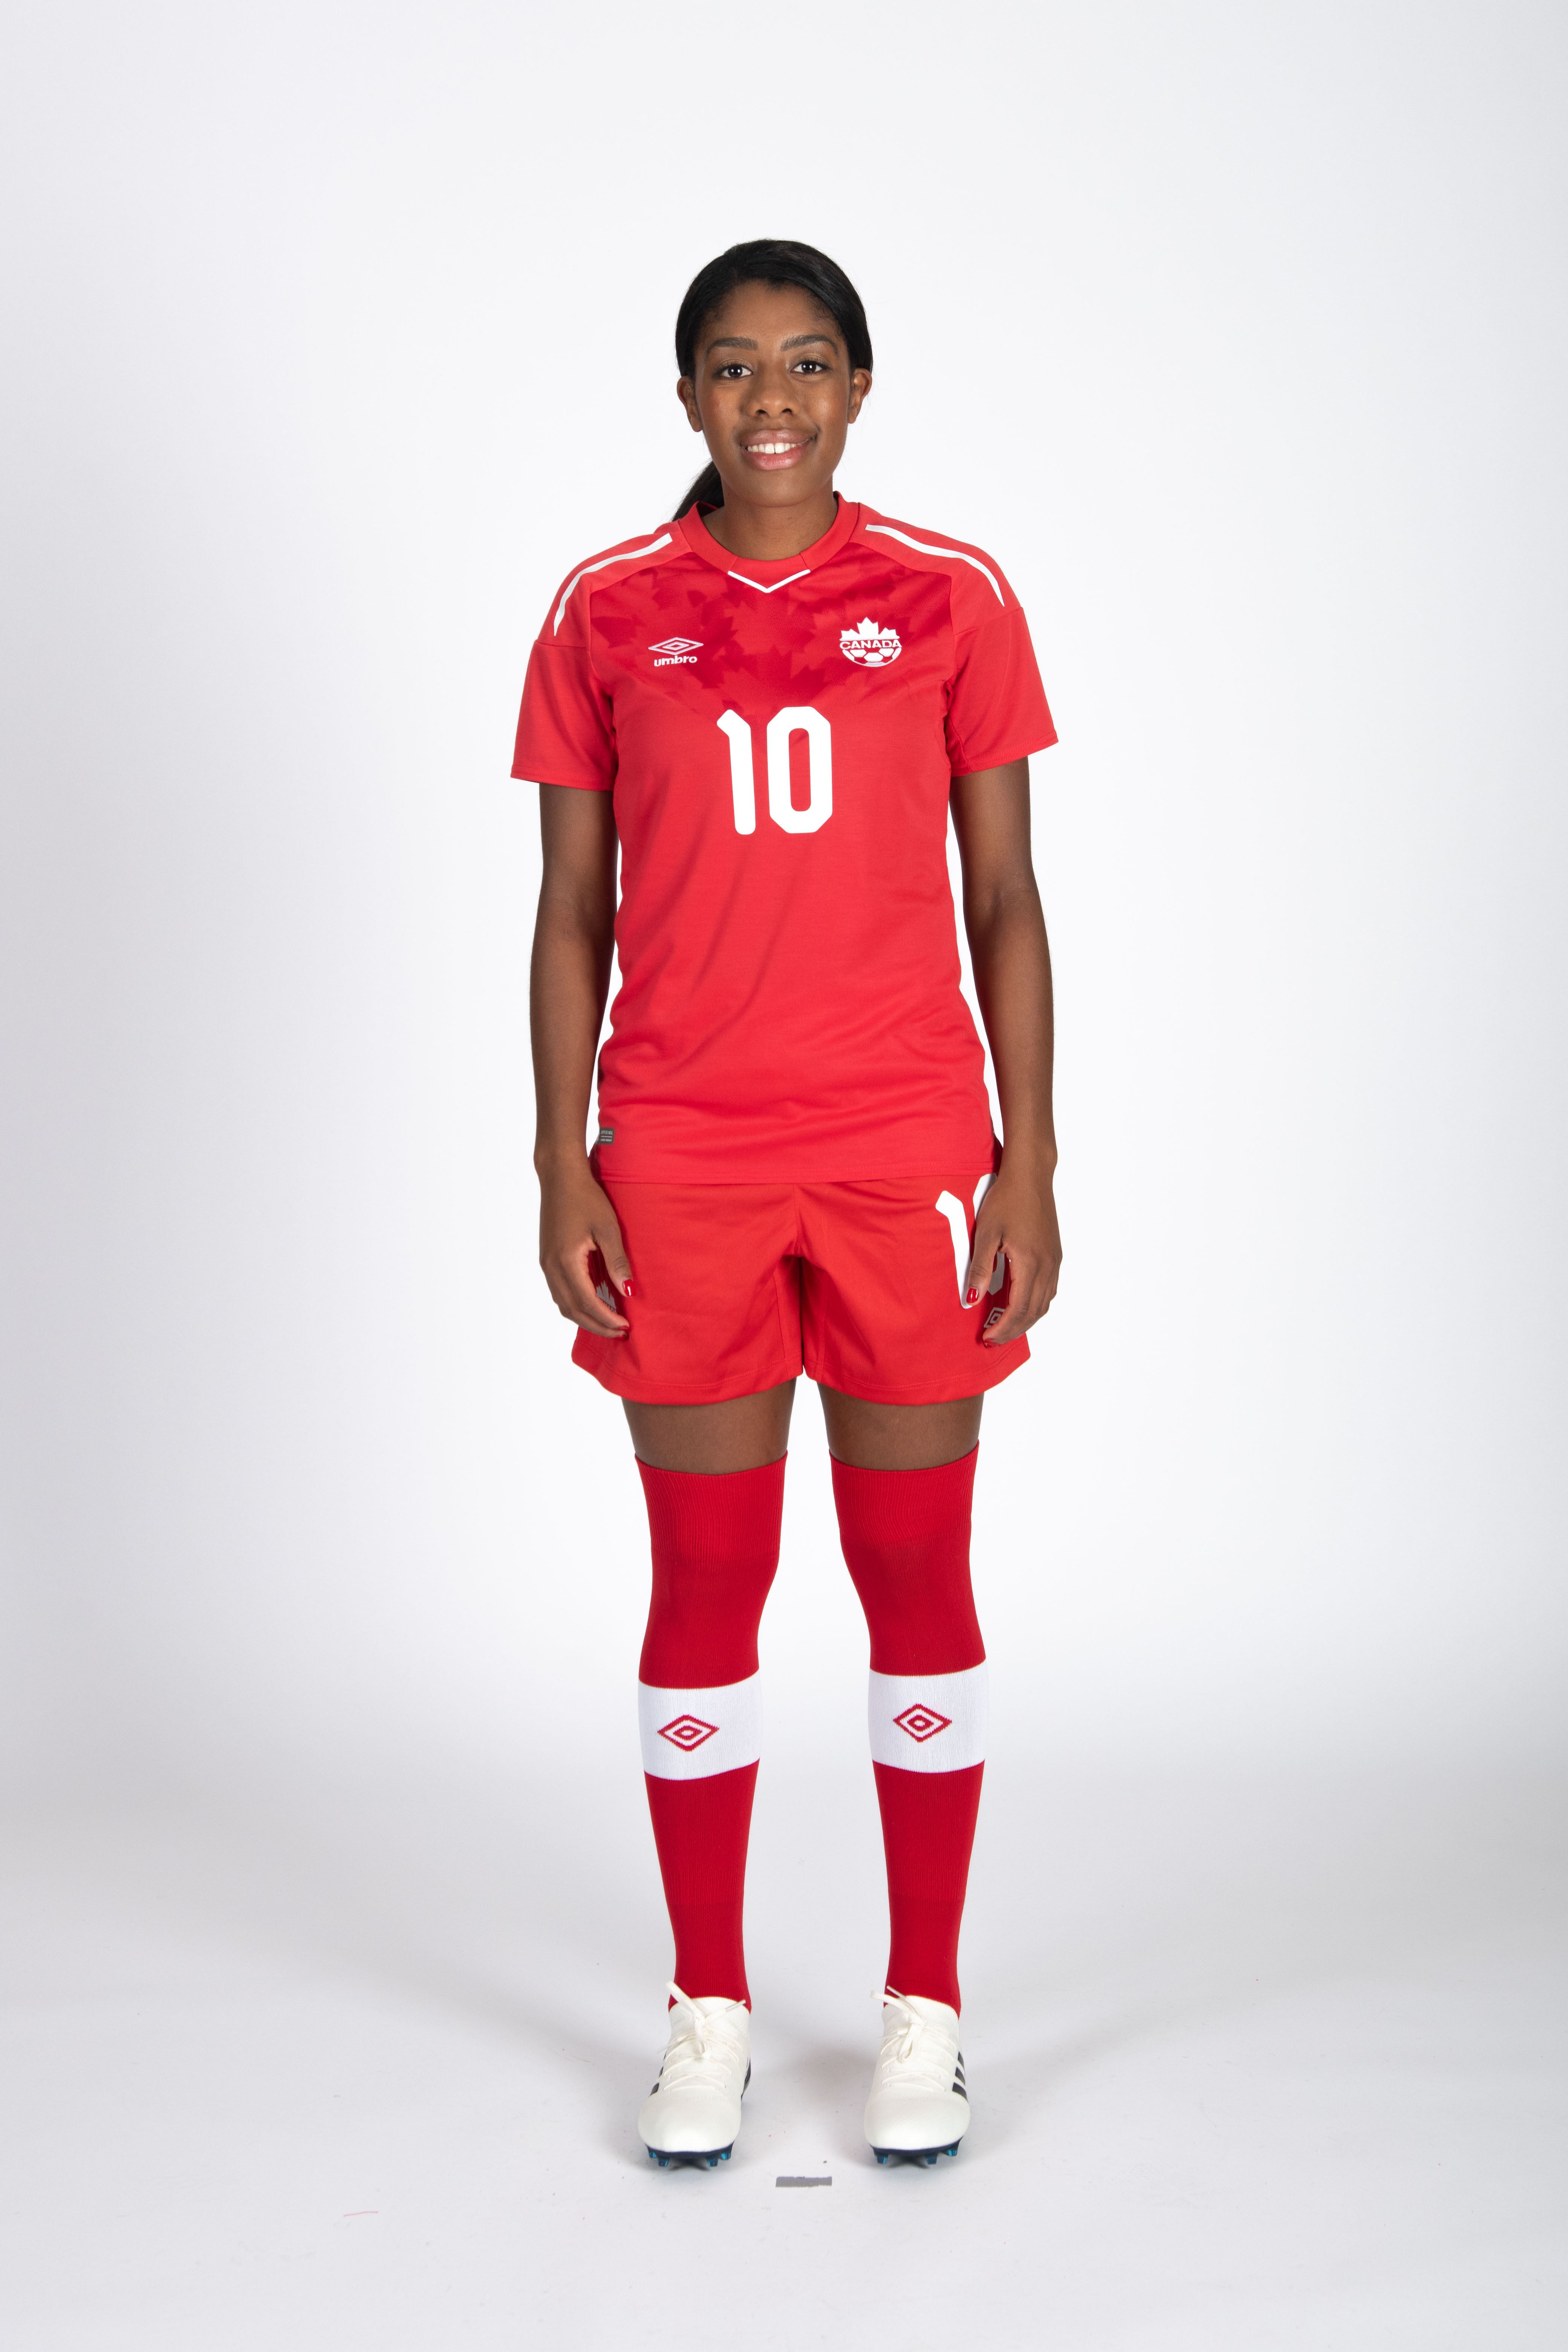 20180604_CANWNT_Lawrence_byBazyl05